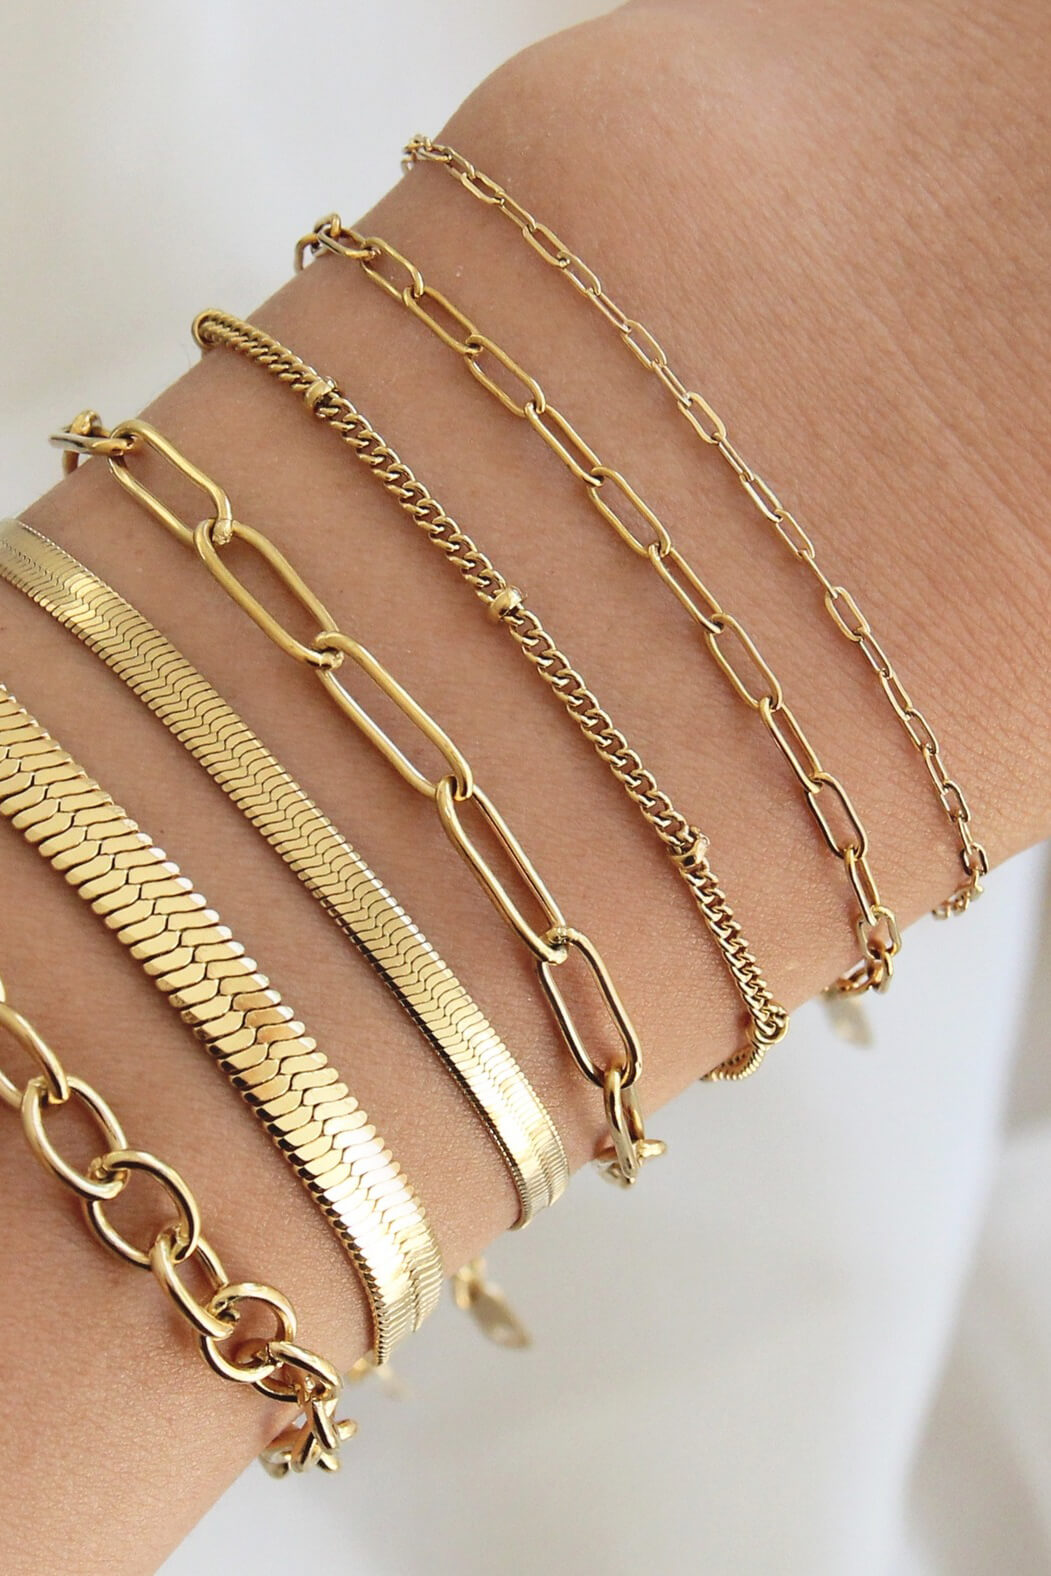 Maive Jewlery small paperclip chain bracelet in 18k gold